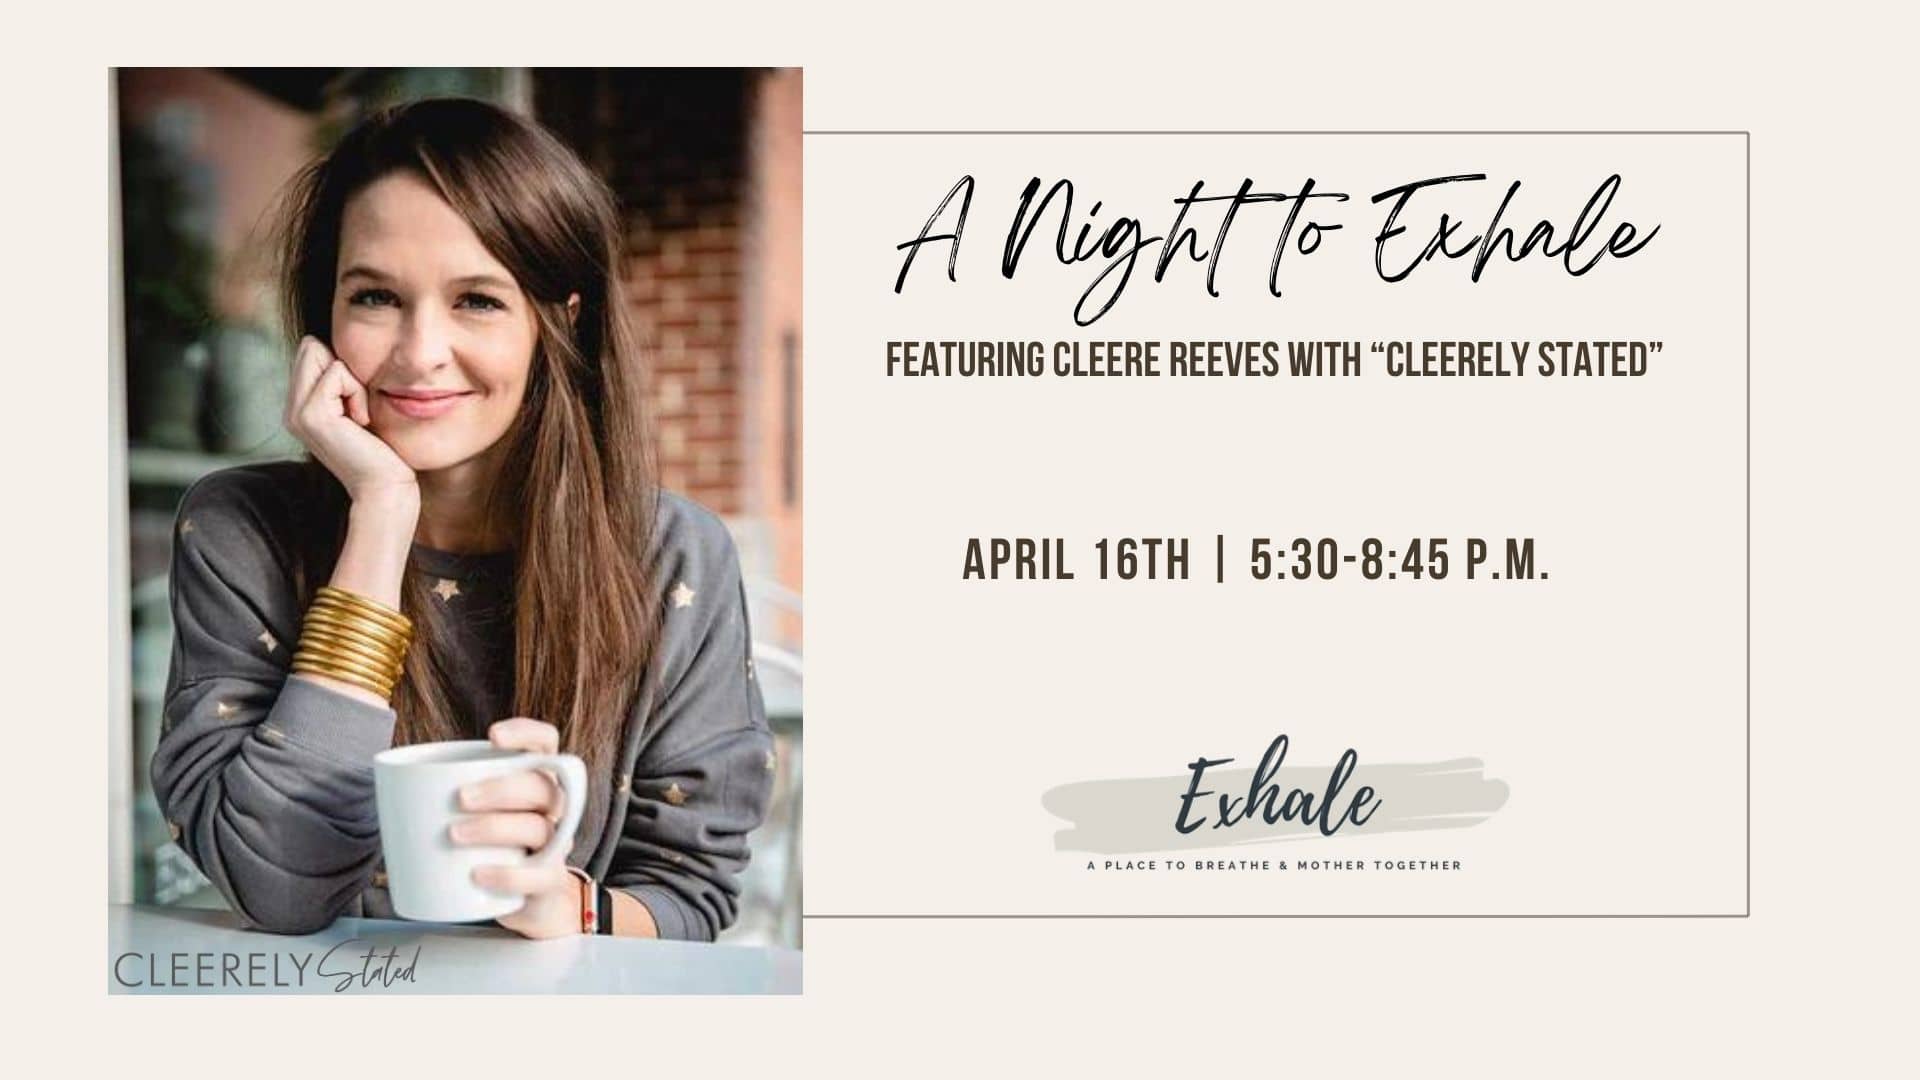 a picture of a women looking at the camera holding a coffee mug with the text "A Night to Exhale featuring Cleere Reeves of Cleerely Stated on April 16 from 5:30 to 8:45 p.m.